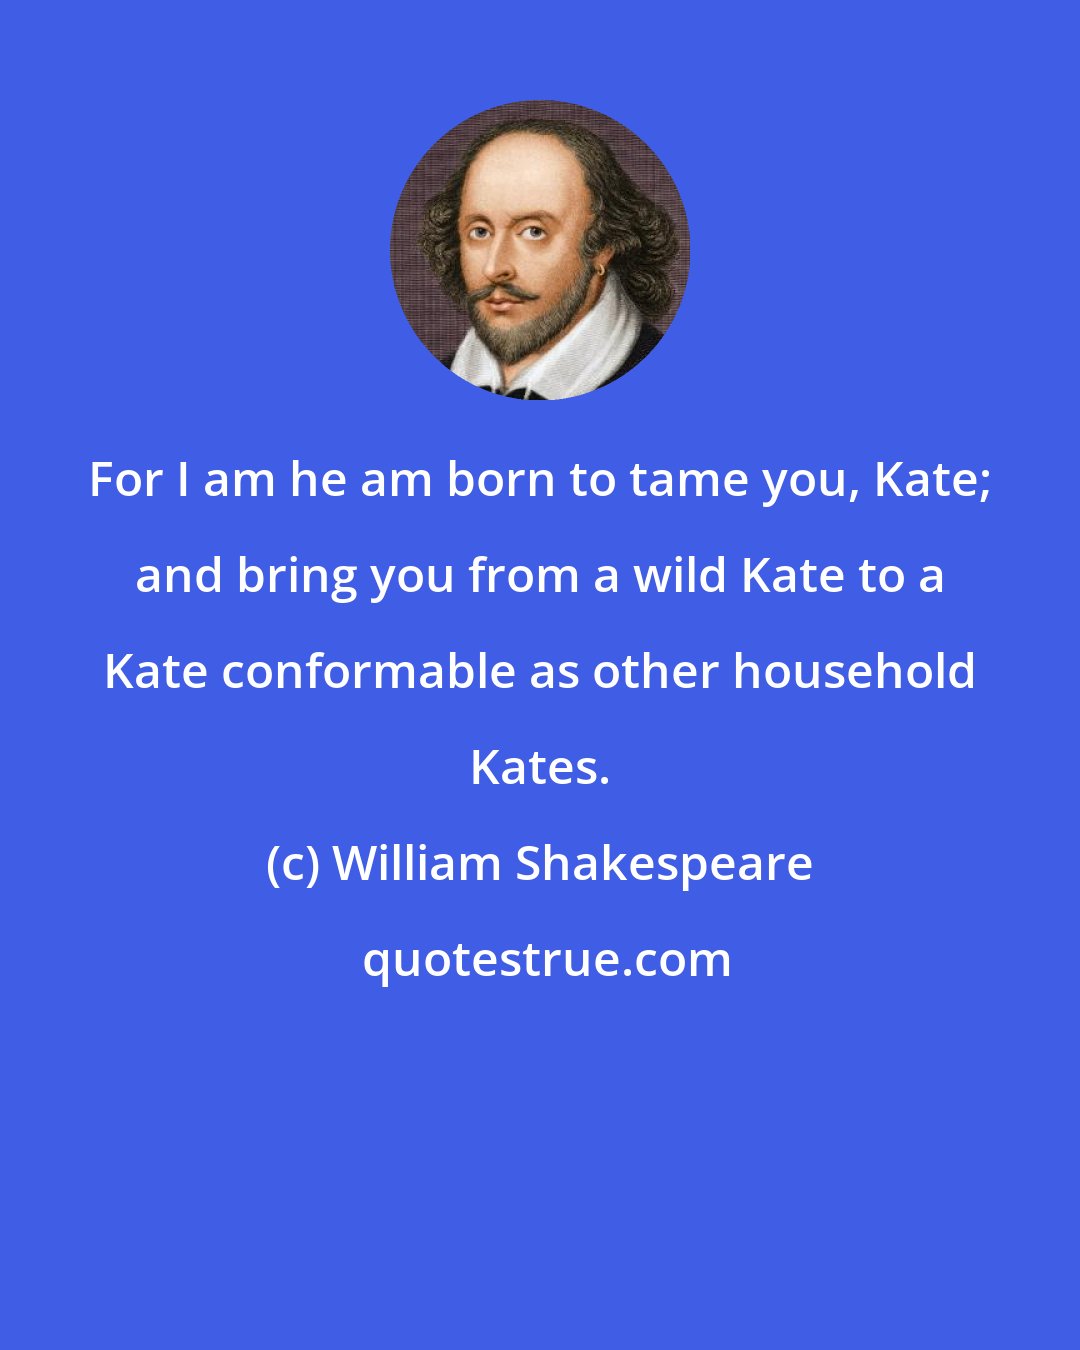 William Shakespeare: For I am he am born to tame you, Kate; and bring you from a wild Kate to a Kate conformable as other household Kates.